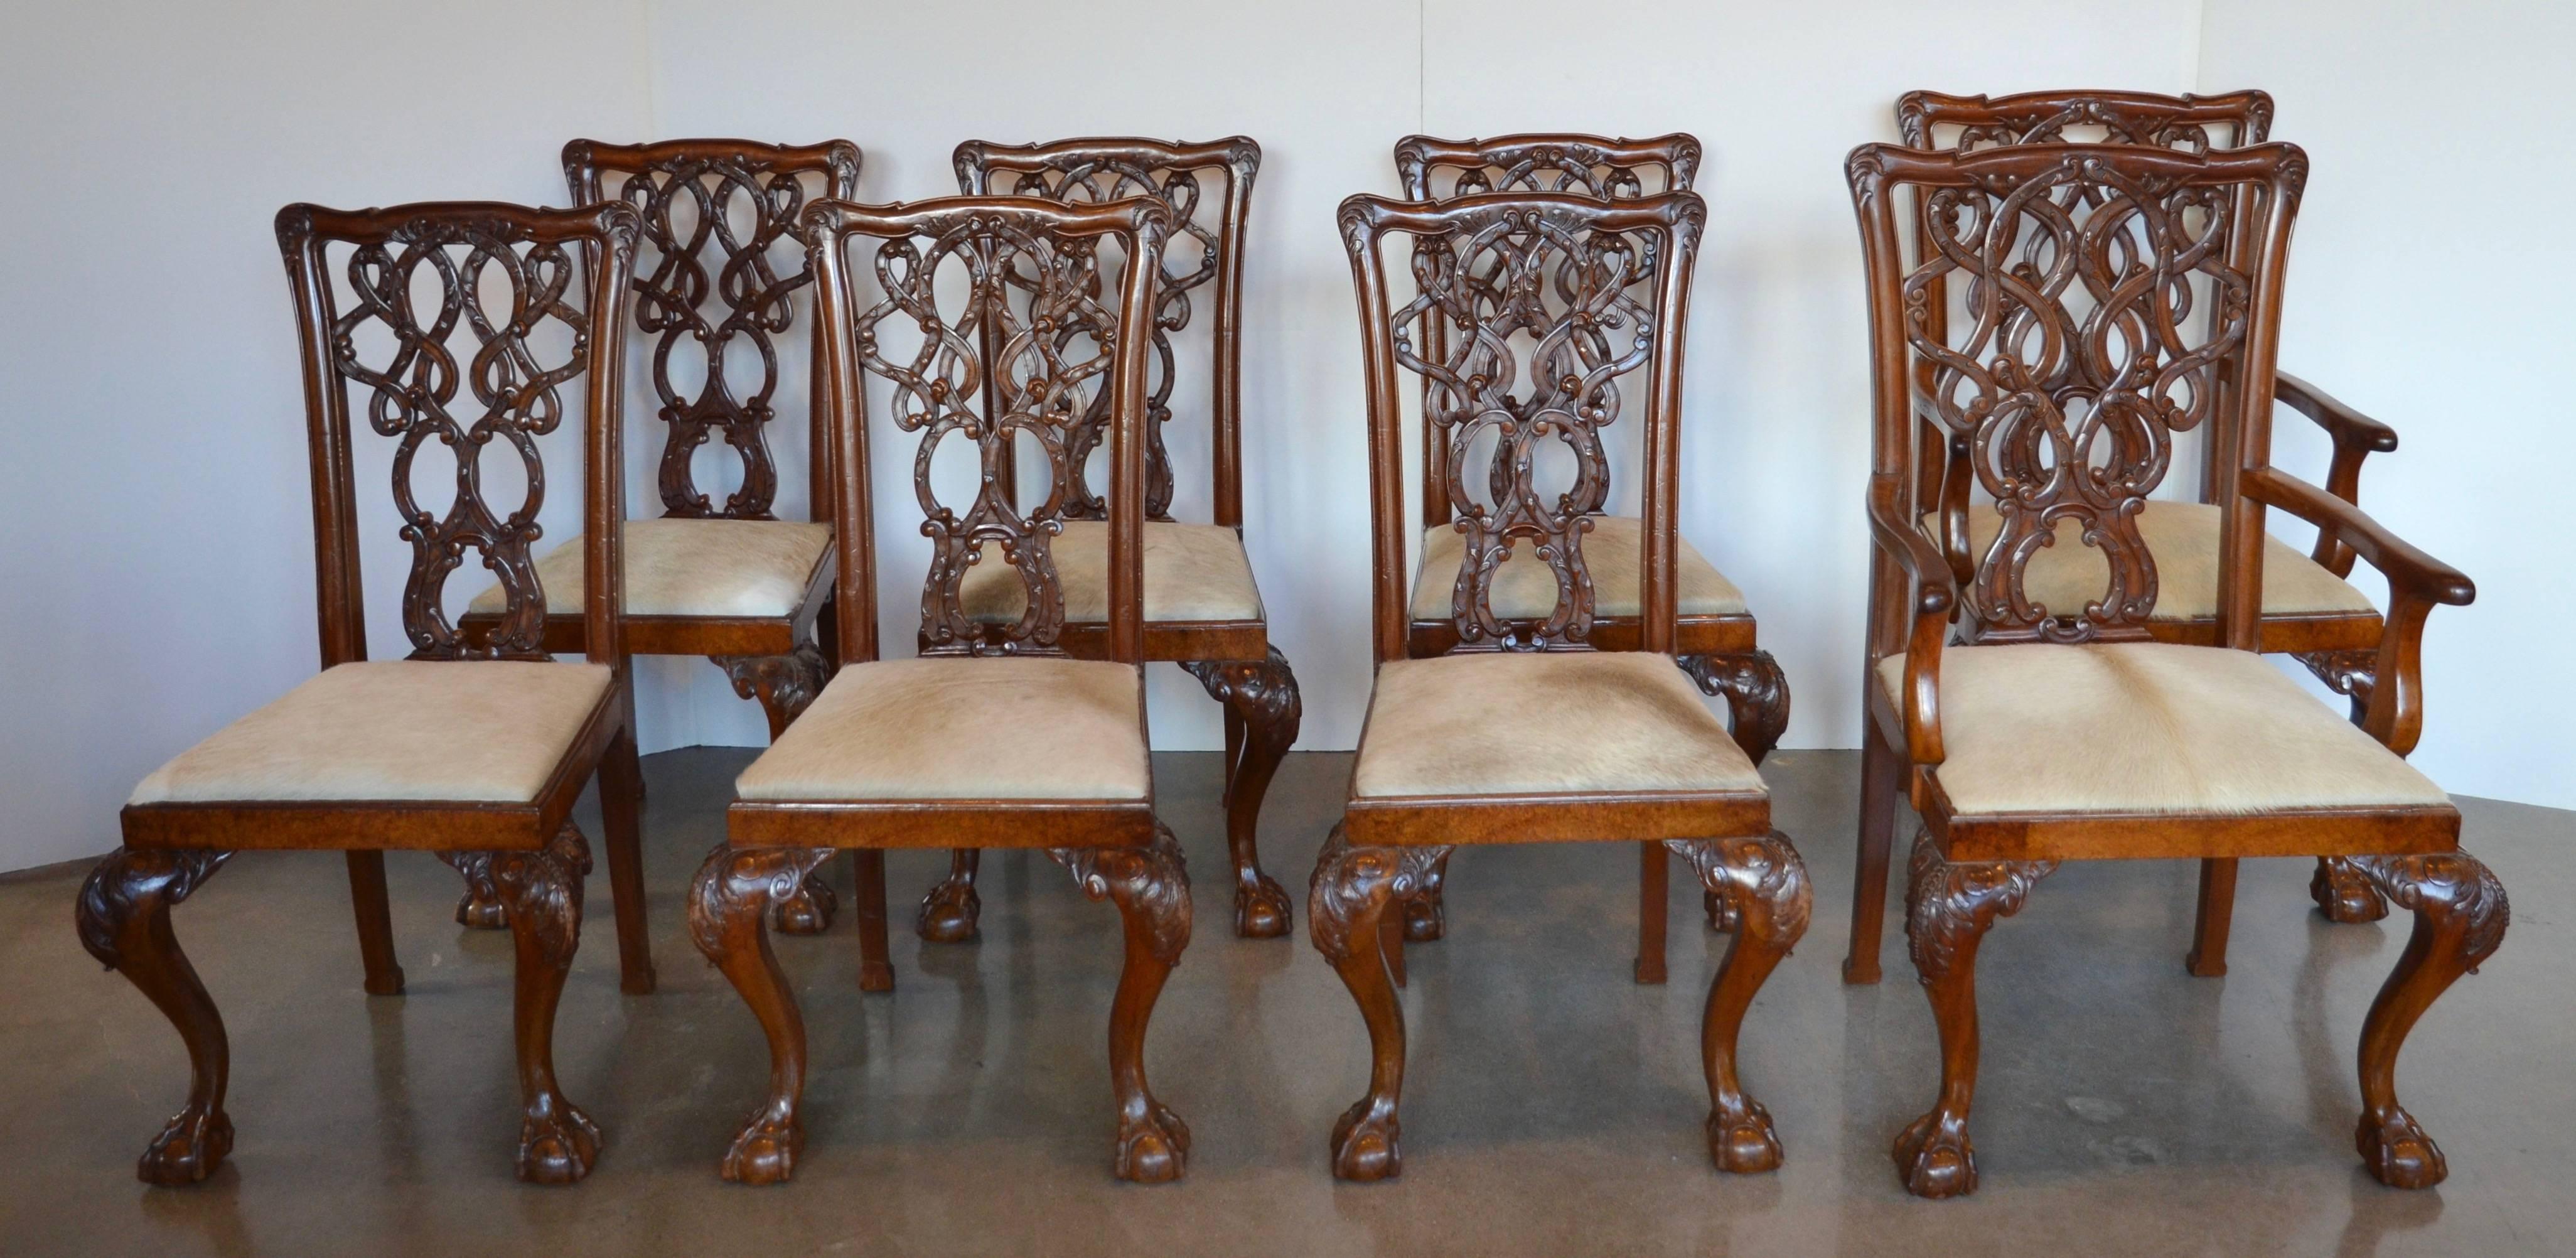 Particularly handsome set of English mahogany Chippendale dining chairs. Gorgeous wood grain and depth to finish, solid and comfortable. Substantially carved backs and ball or claw feet. Newly upholstered seats in fawn cowhide. Eight total chairs,